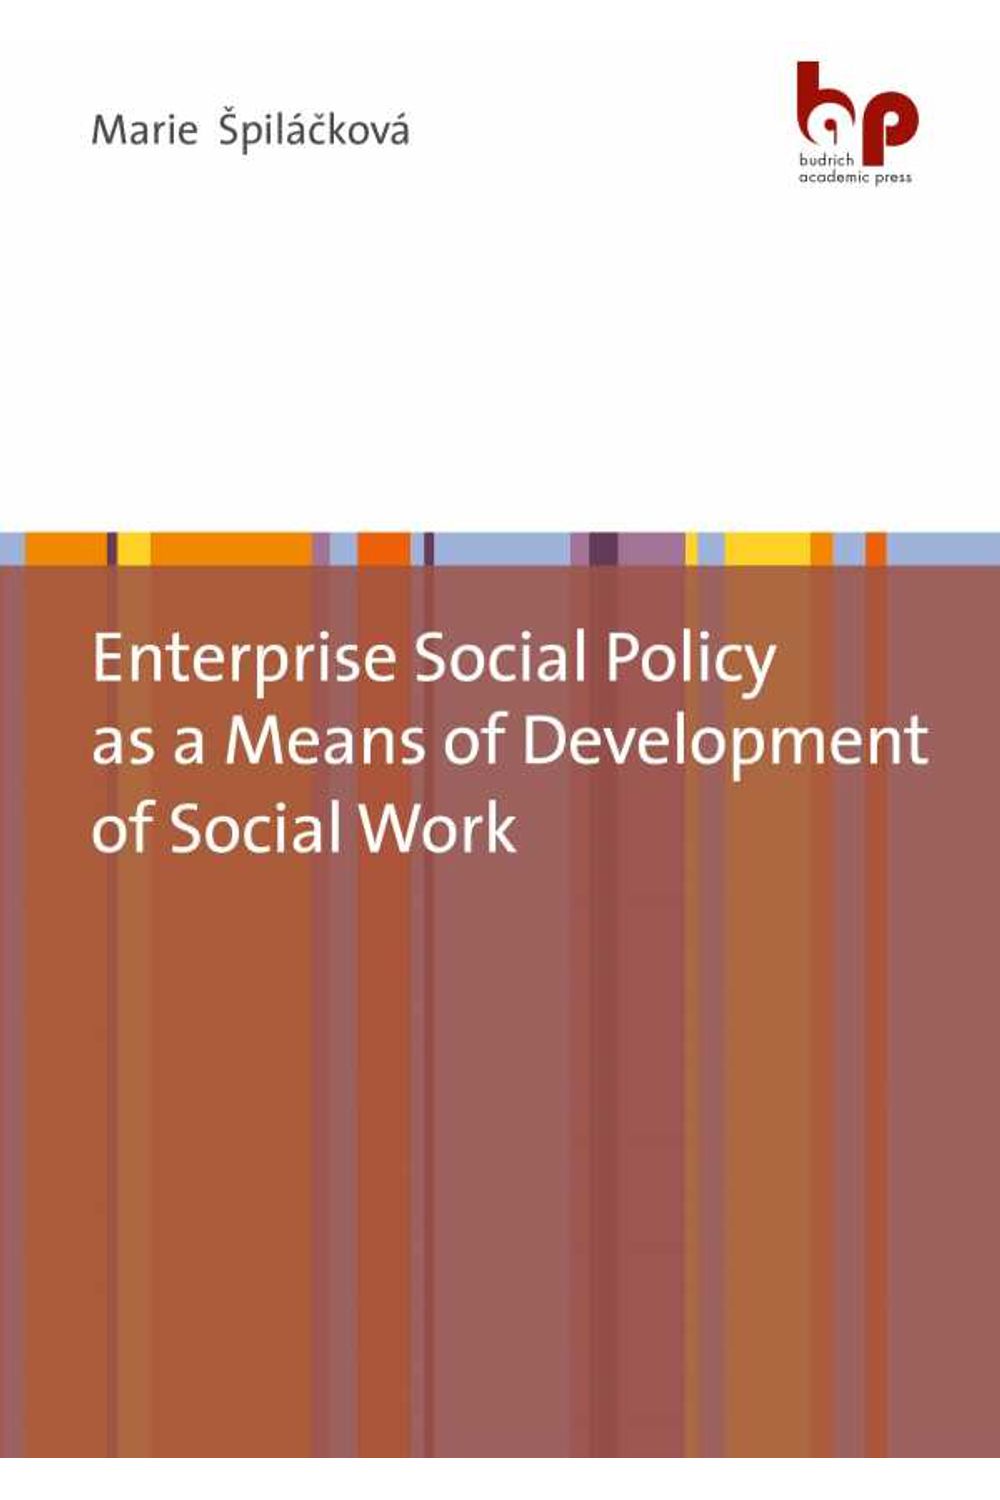 bw-enterprise-social-policy-as-a-means-of-development-of-social-work-budrich-academic-press-9783966659925